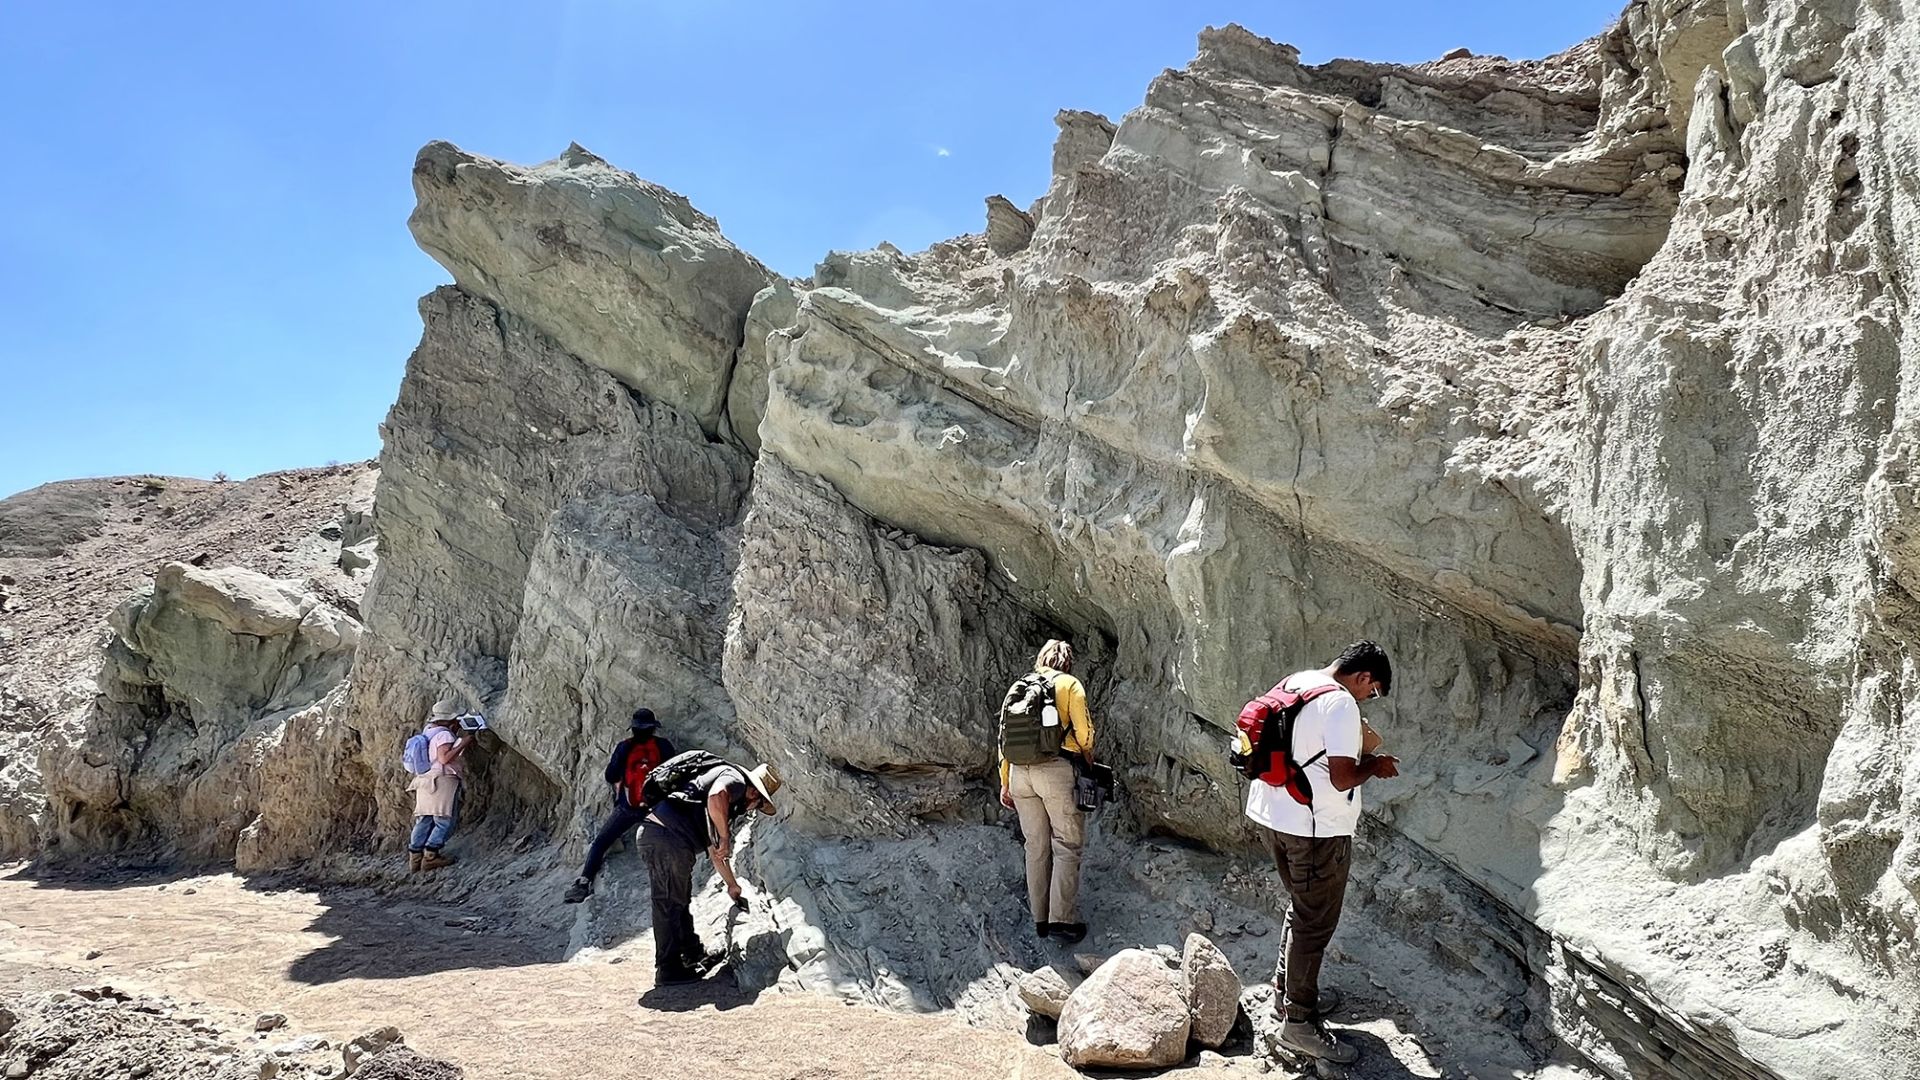 Geological sciences students studying rock formations